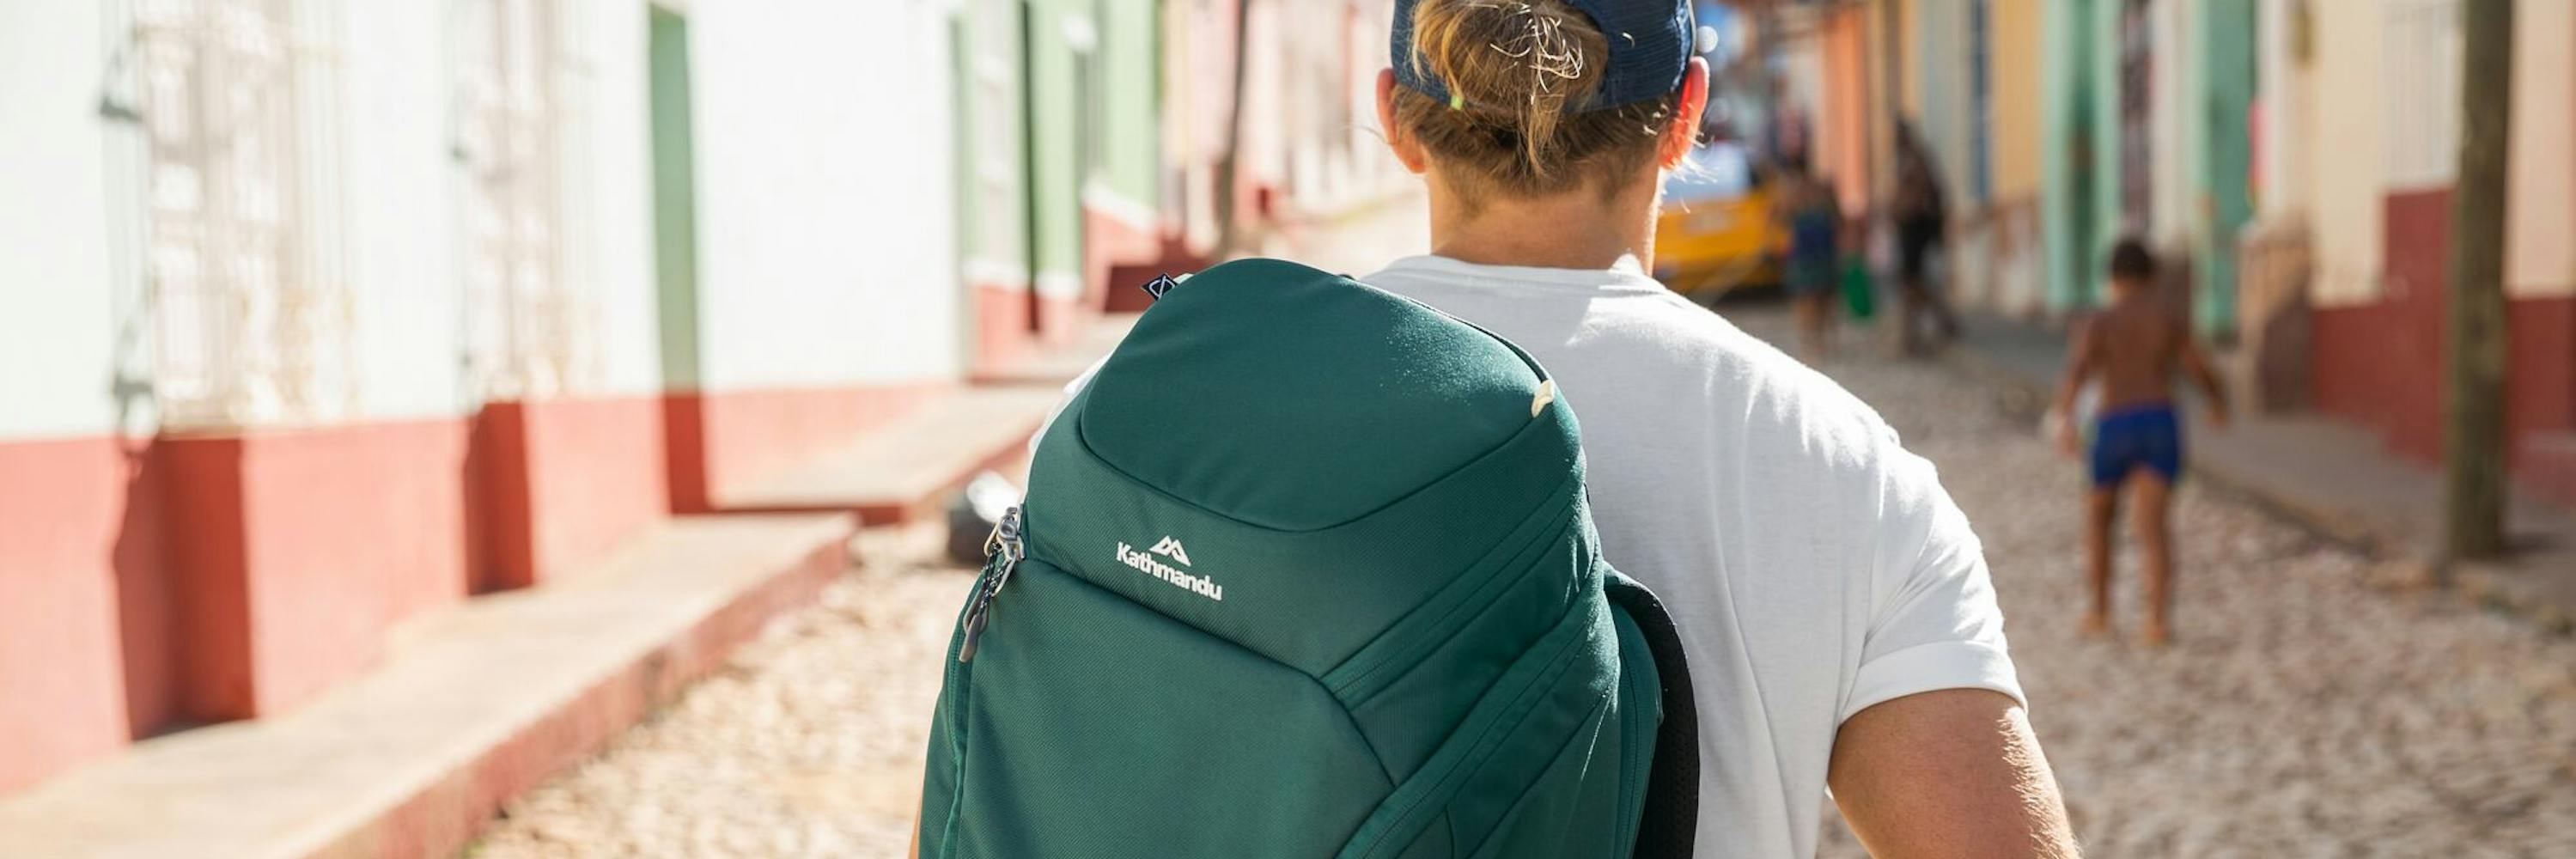 How to Wash a Backpack & Tips for Cleaning Packs | Kathmandu Blog